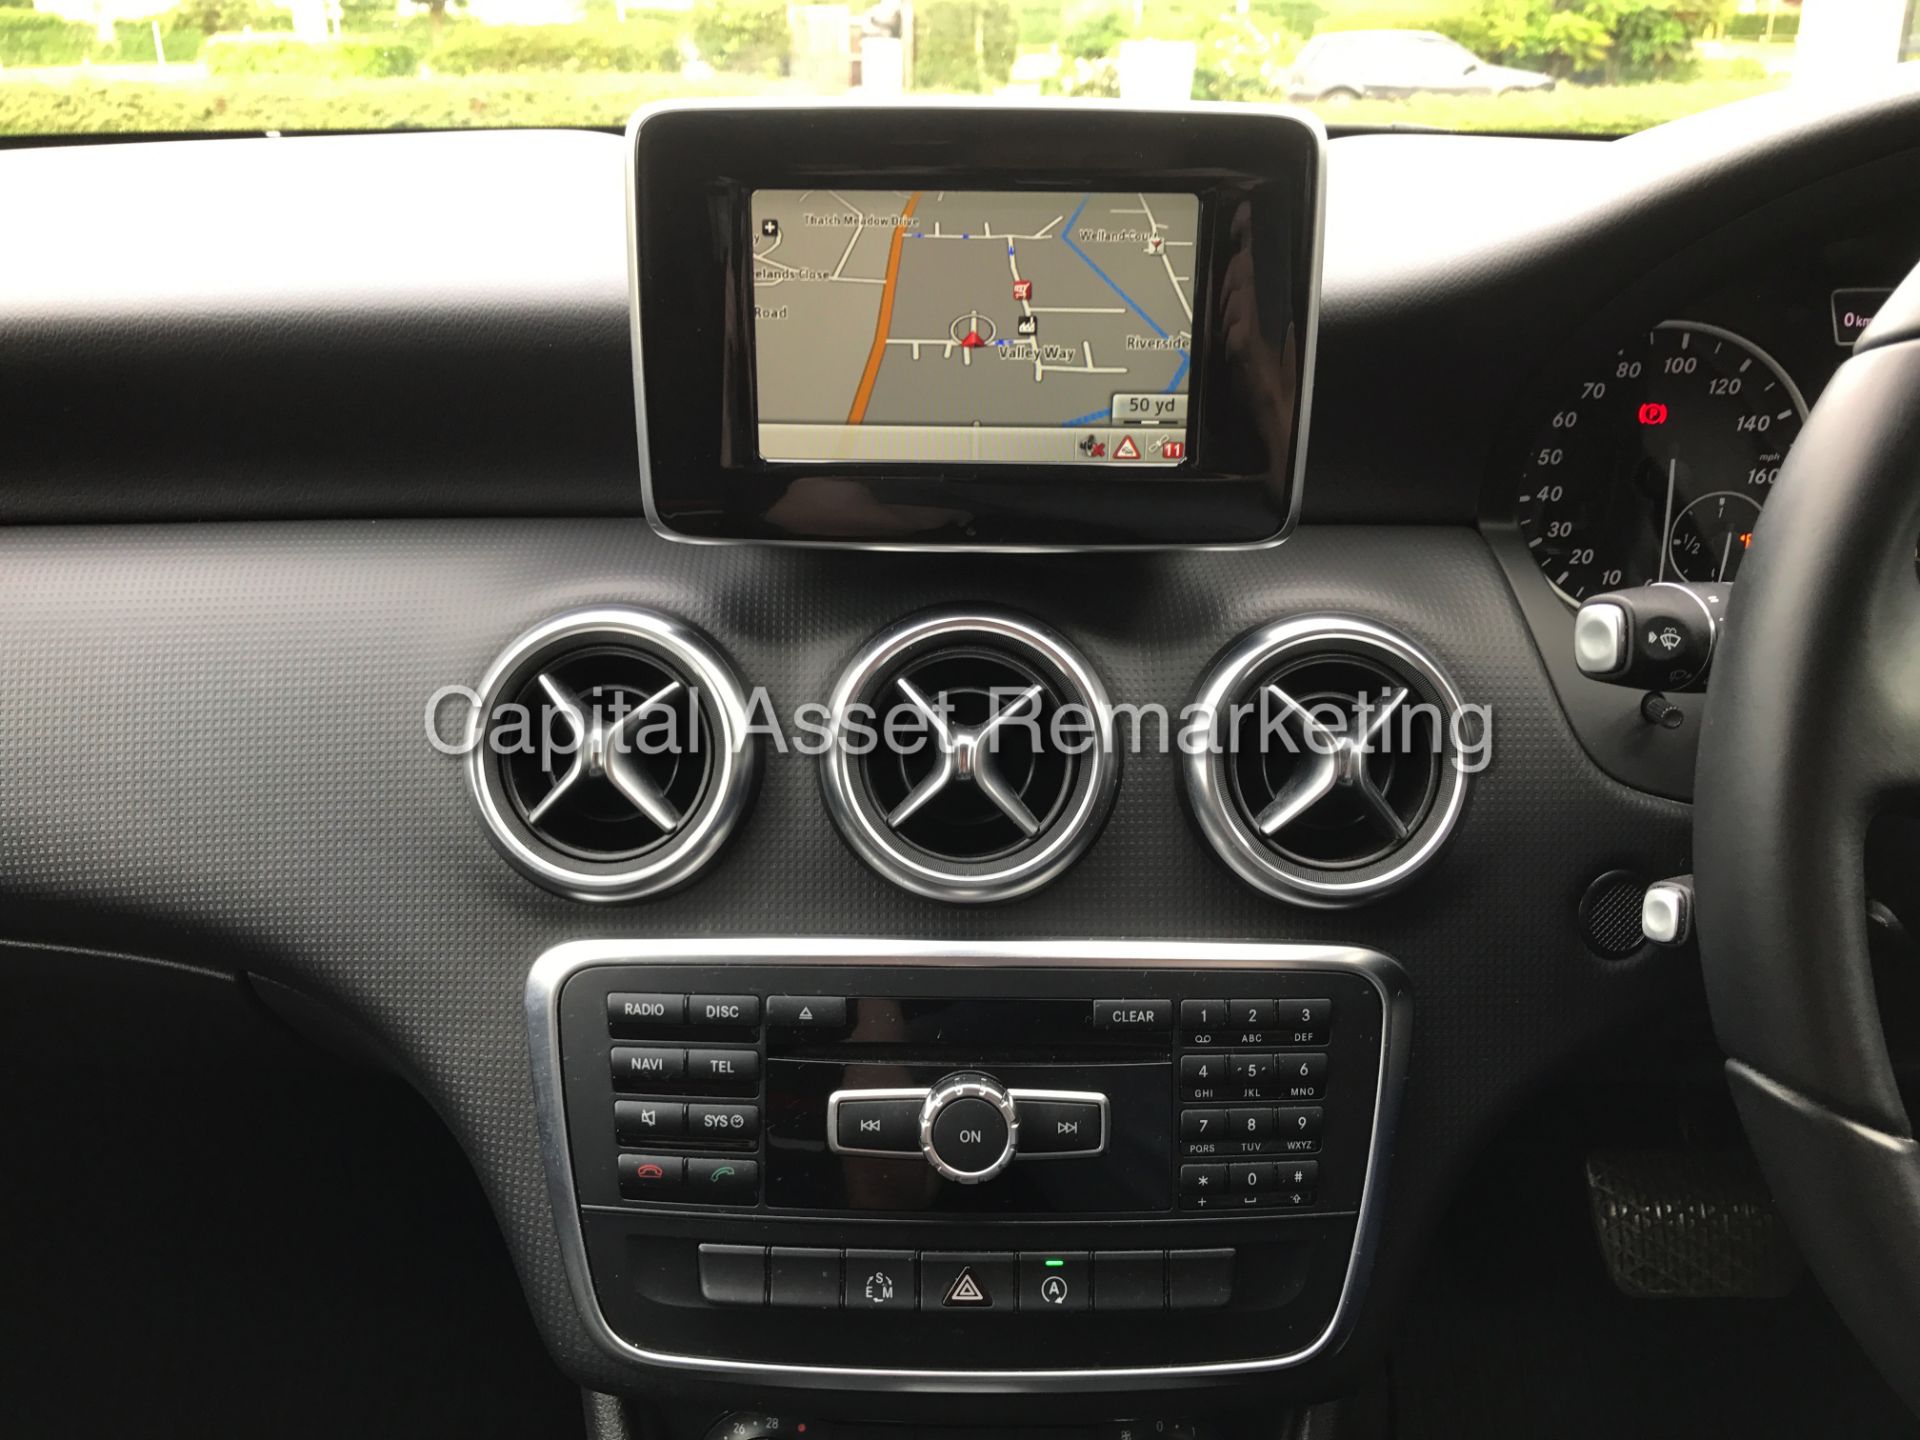 (ON SALE) MERCEDES A180d 7G TRONIC "15 REG" SAT NAV - 1 OWNER - PADDEL SHIFT - CRUISE - AIR CON - Image 17 of 22